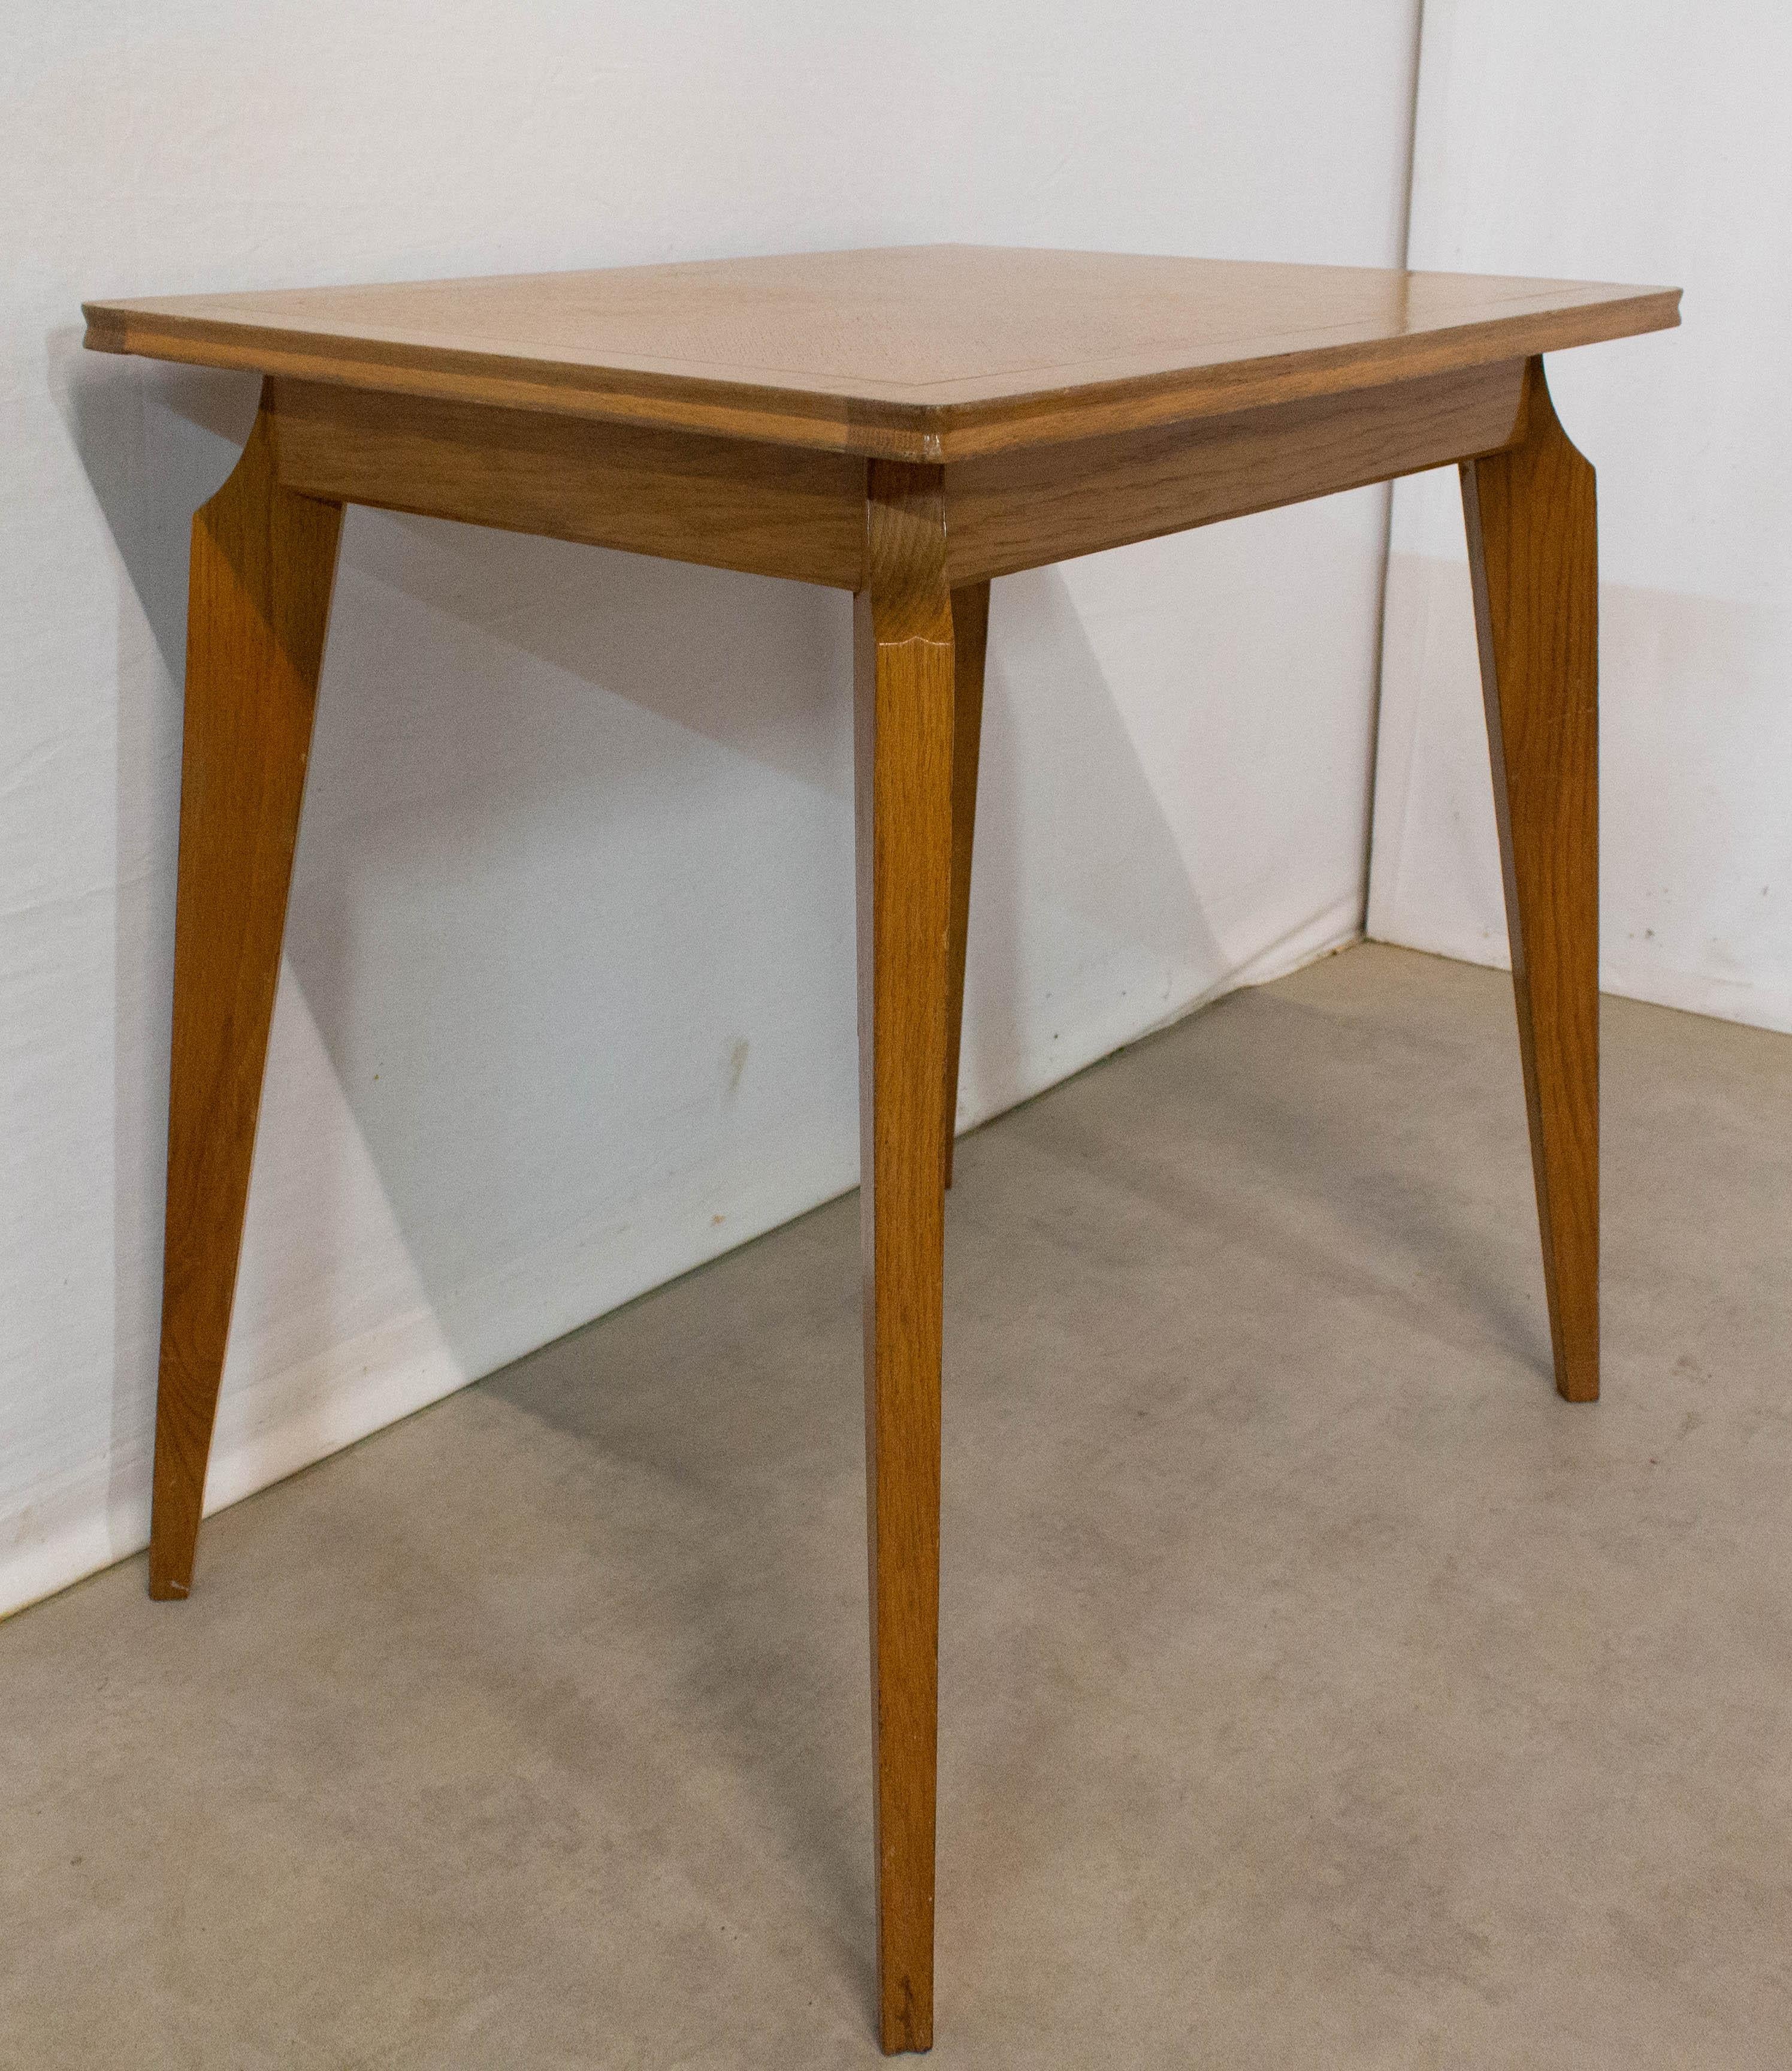 French writing table, little desk or side table, circa 1950.
Table top in perfect condition

For shipping: 
60/80/74.5cm 11kg.